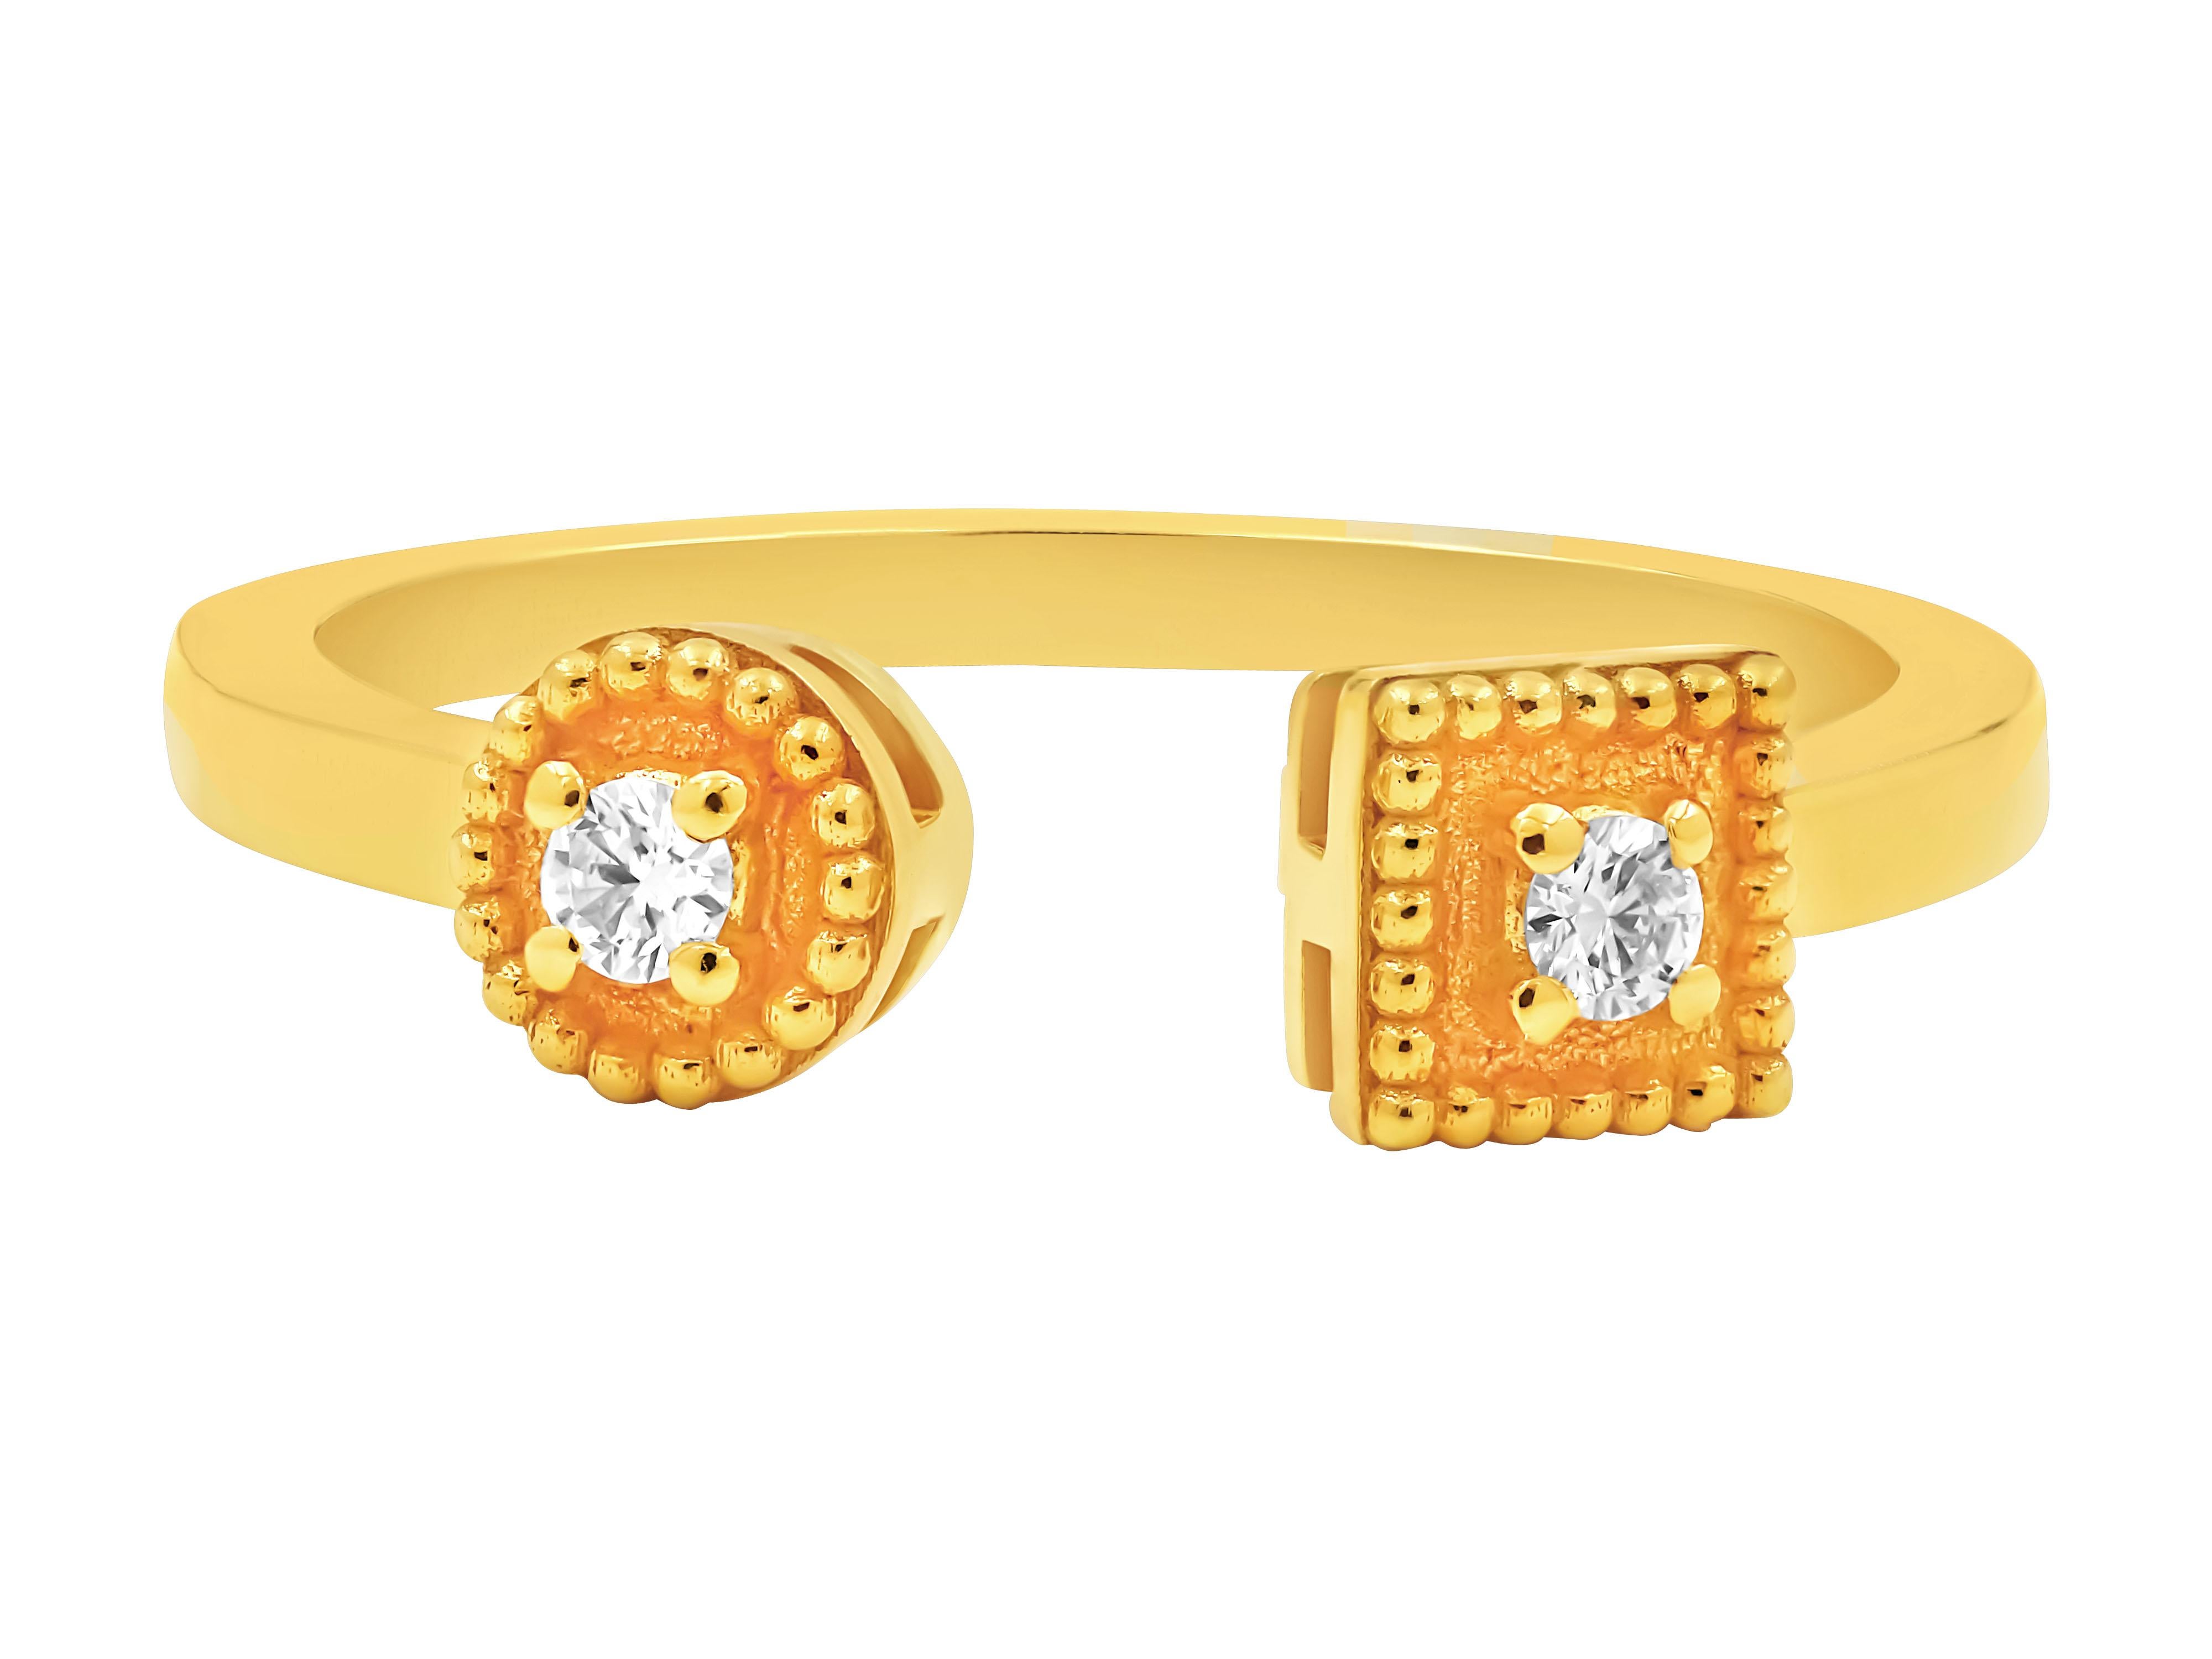 Granulated neoclassic ring in 18k gold with 0.08 carats brilliant  cut diamonds that combines classical aesthetics with modern techniques. The neoclassic design of the ring takes inspiration from Ancient Greek art, characterized by its clean lines,